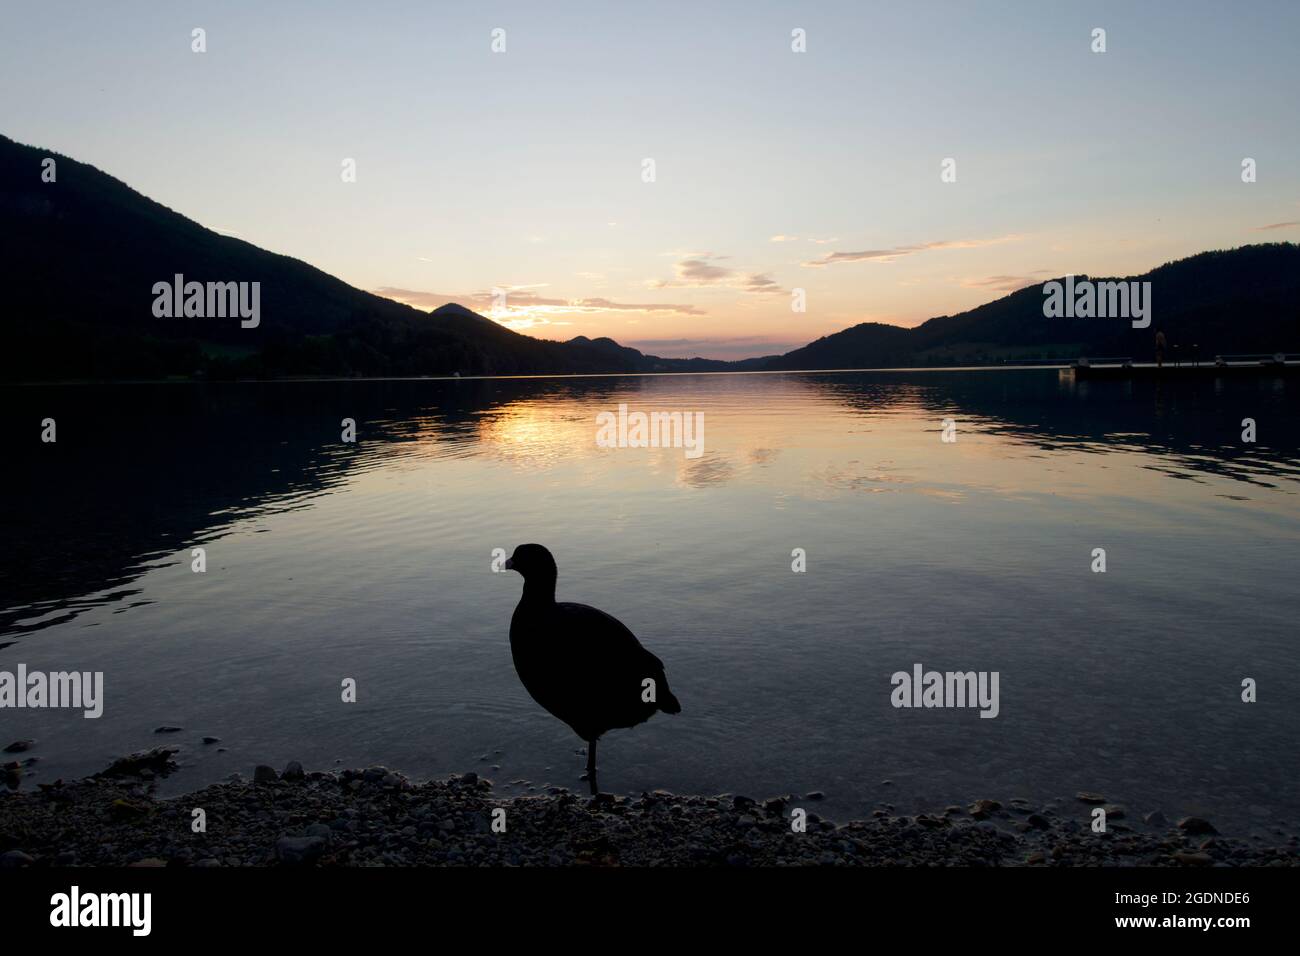 Large duck silhouette on lake shoreline, sunset reflections in the water with Alpine mountain silhouette backdrop, Fuschl lake, Fuschl am See, Austria Stock Photo